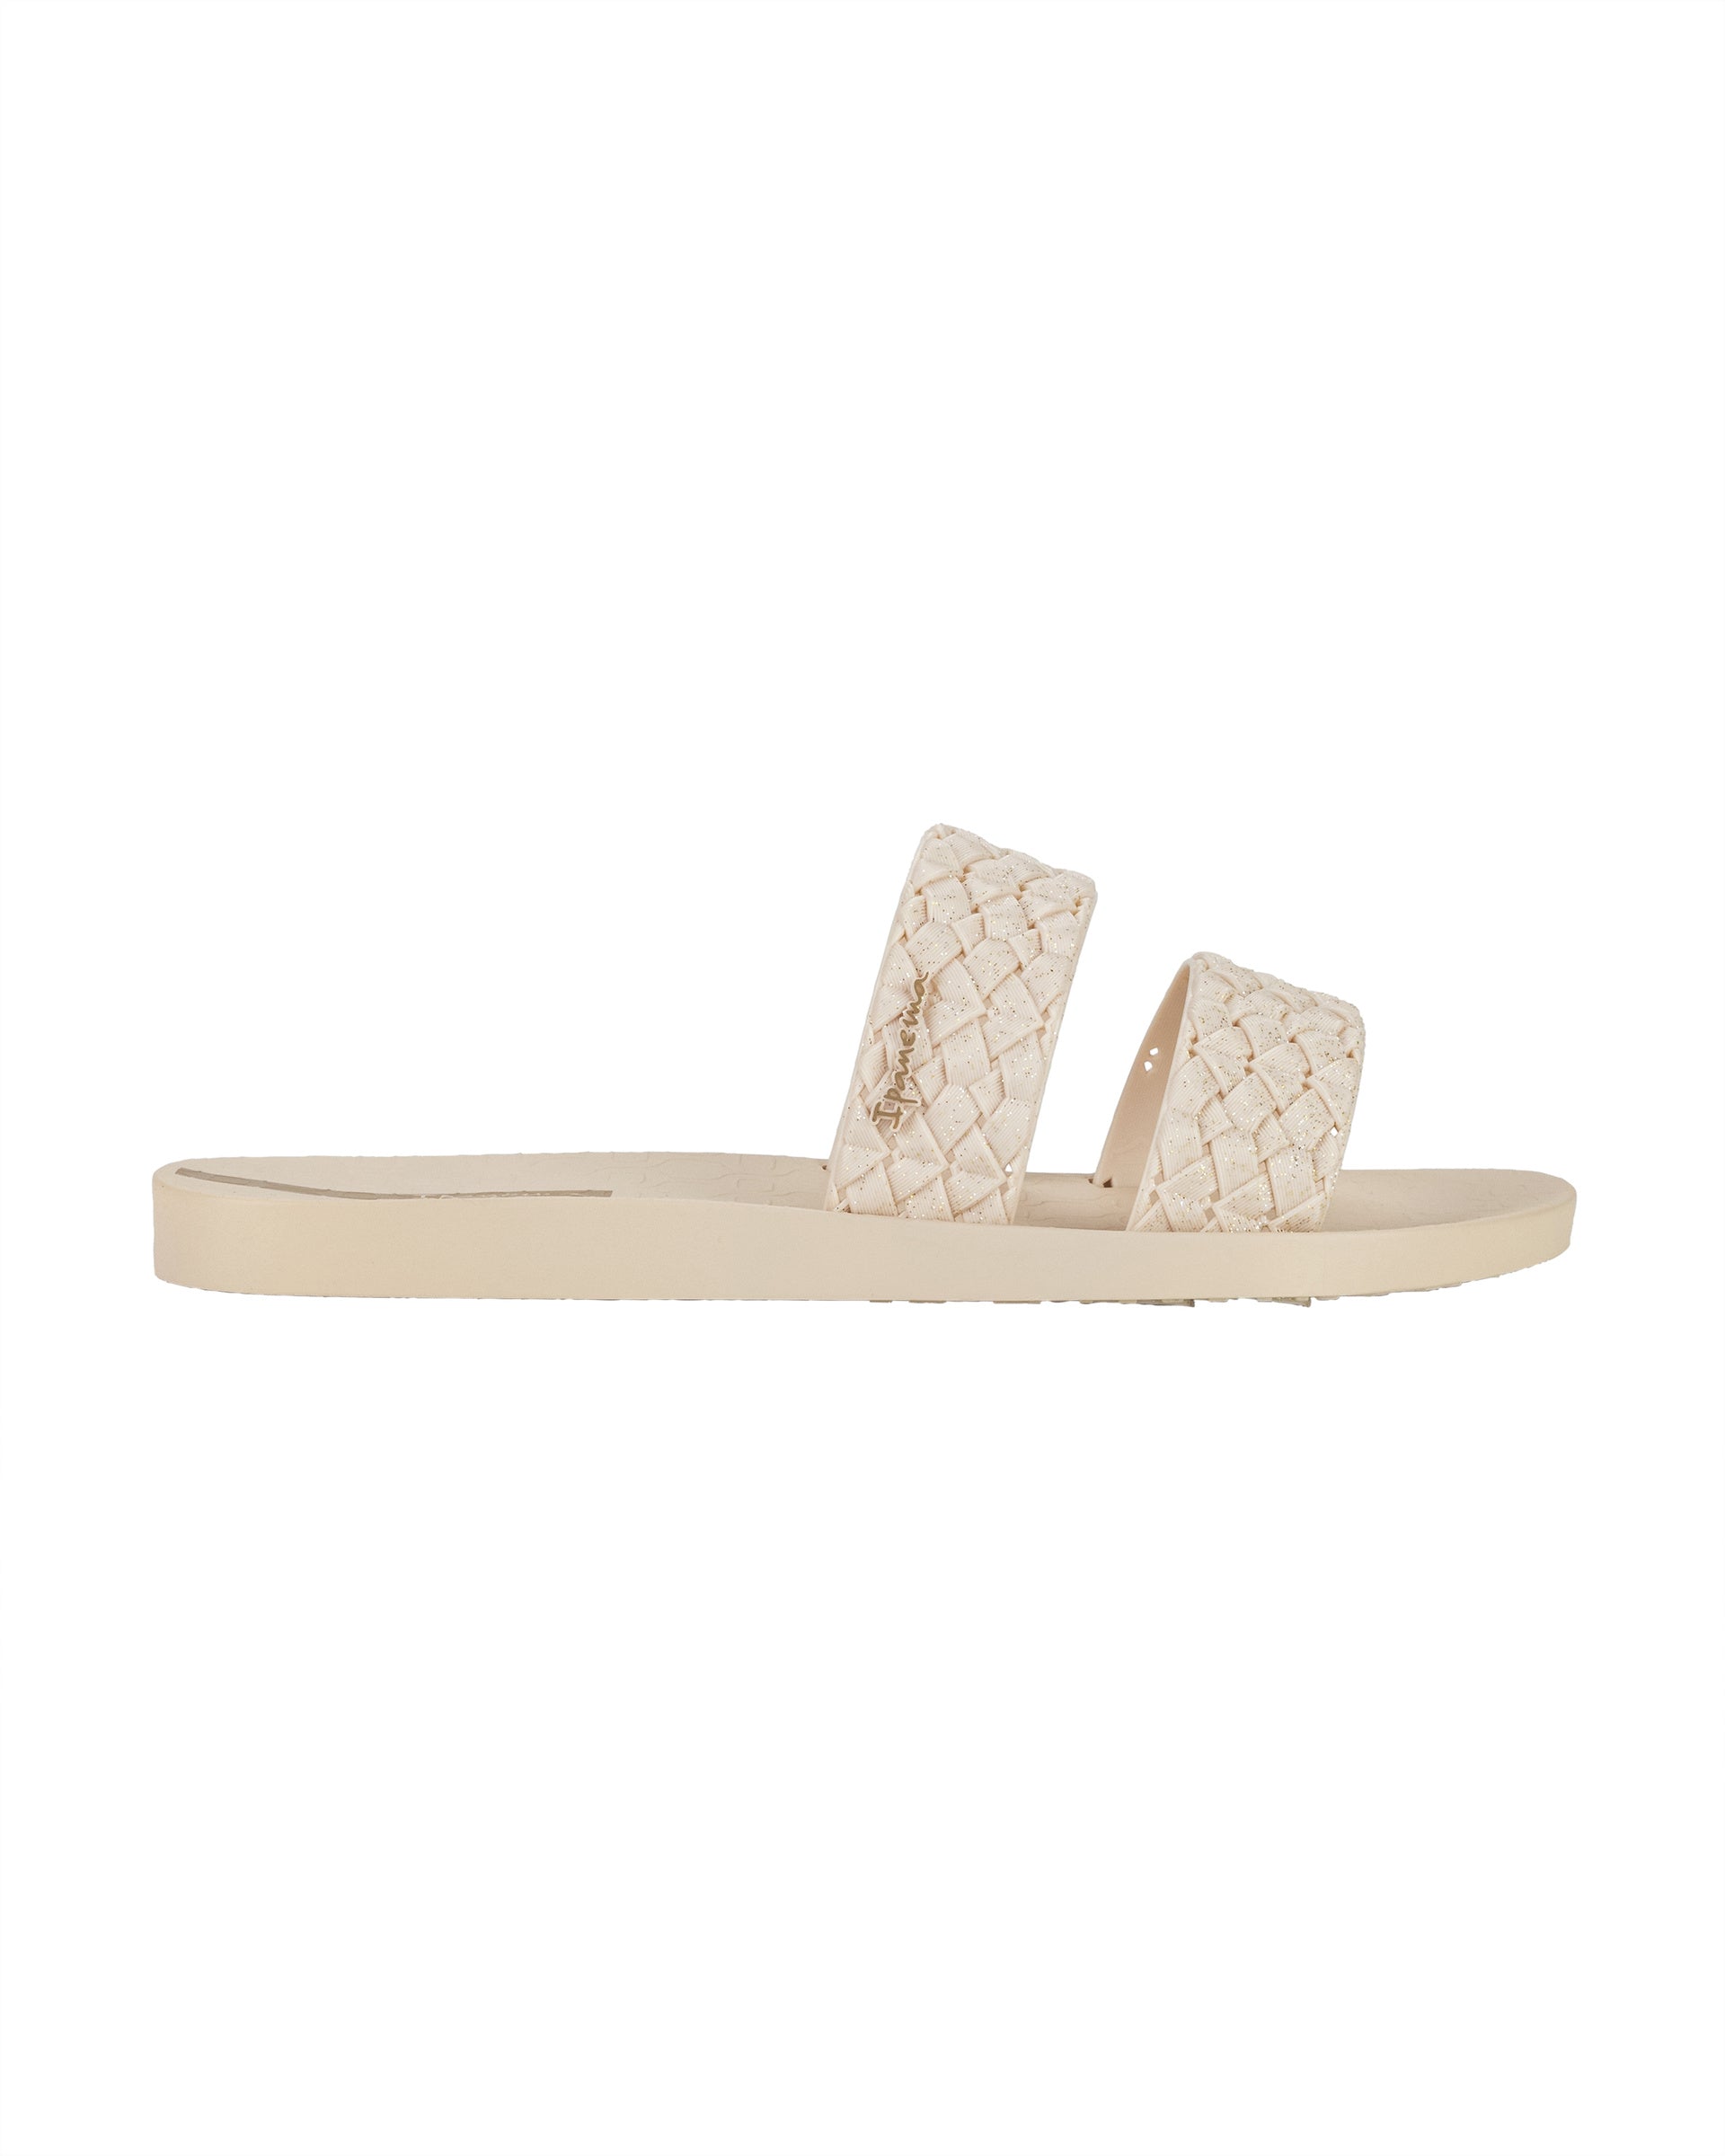 Outer side view of a beige Ipanema Renda women's slide with braided beige glitter straps.